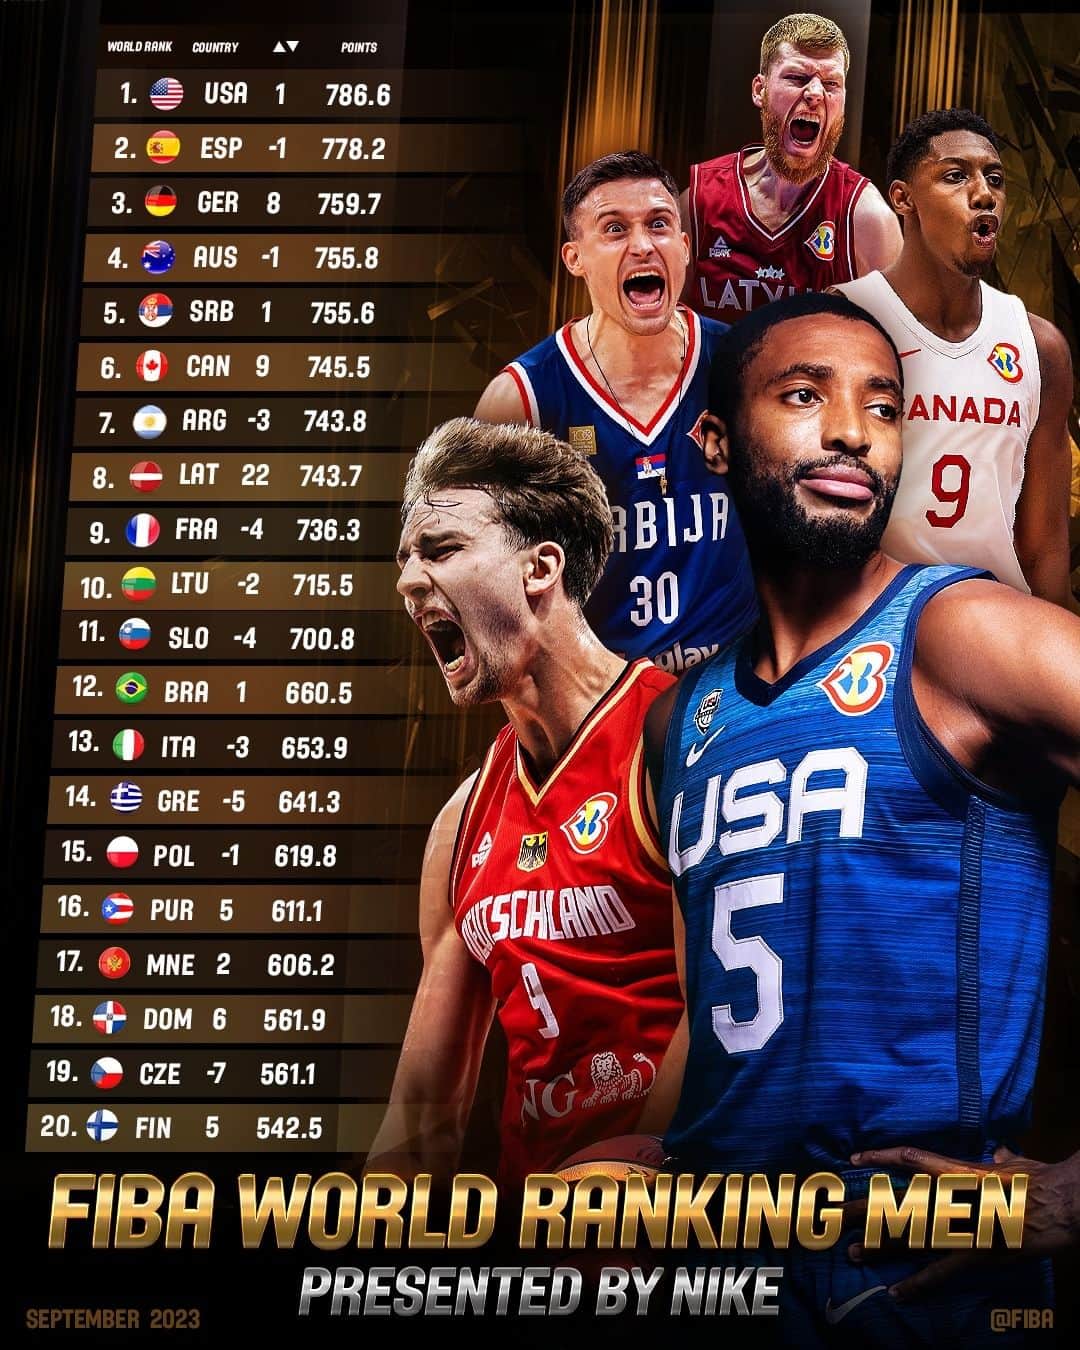 FIBAのインスタグラム：「🚨 𝗕𝗥𝗘𝗔𝗞𝗜𝗡𝗚 🚨  🇺🇸 USA reclaim #1 spot in FIBA Men’s World Ranking, presented by @Nike!  📊 See the full rankings from the link in profile.」